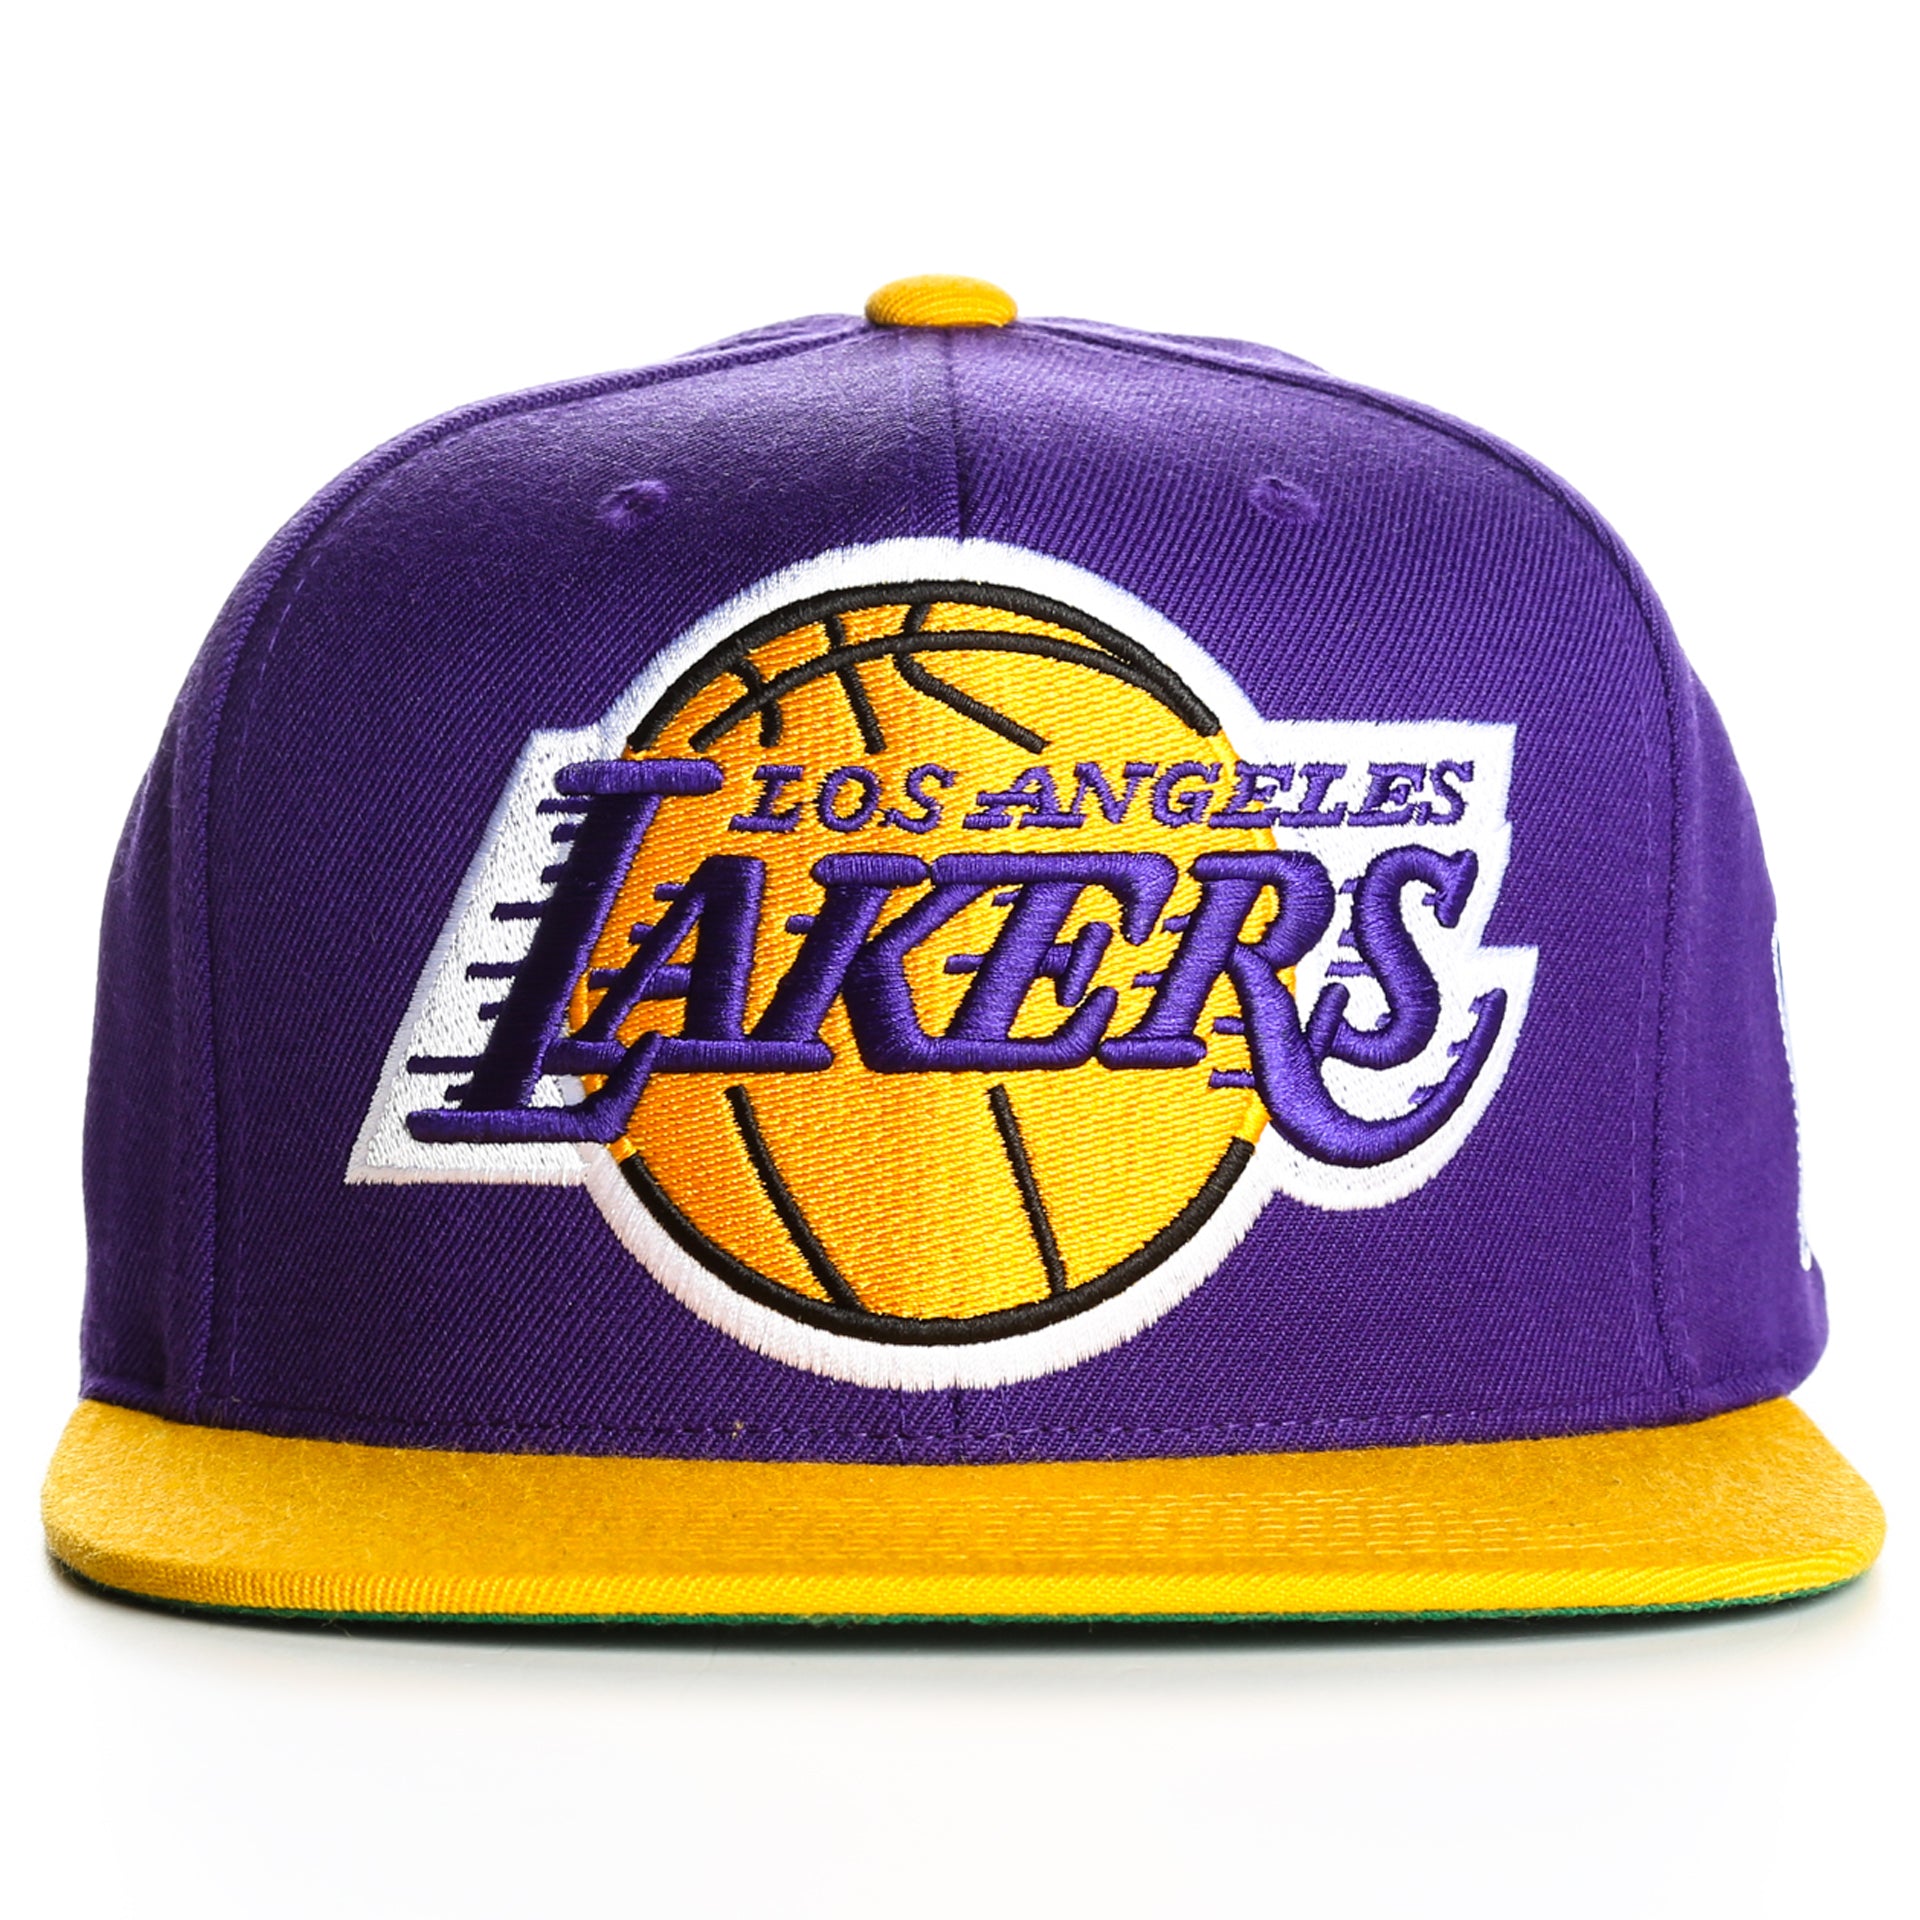 Los Angeles Lakers 2T XL-LOGO Purple-Gold Fitted Hat